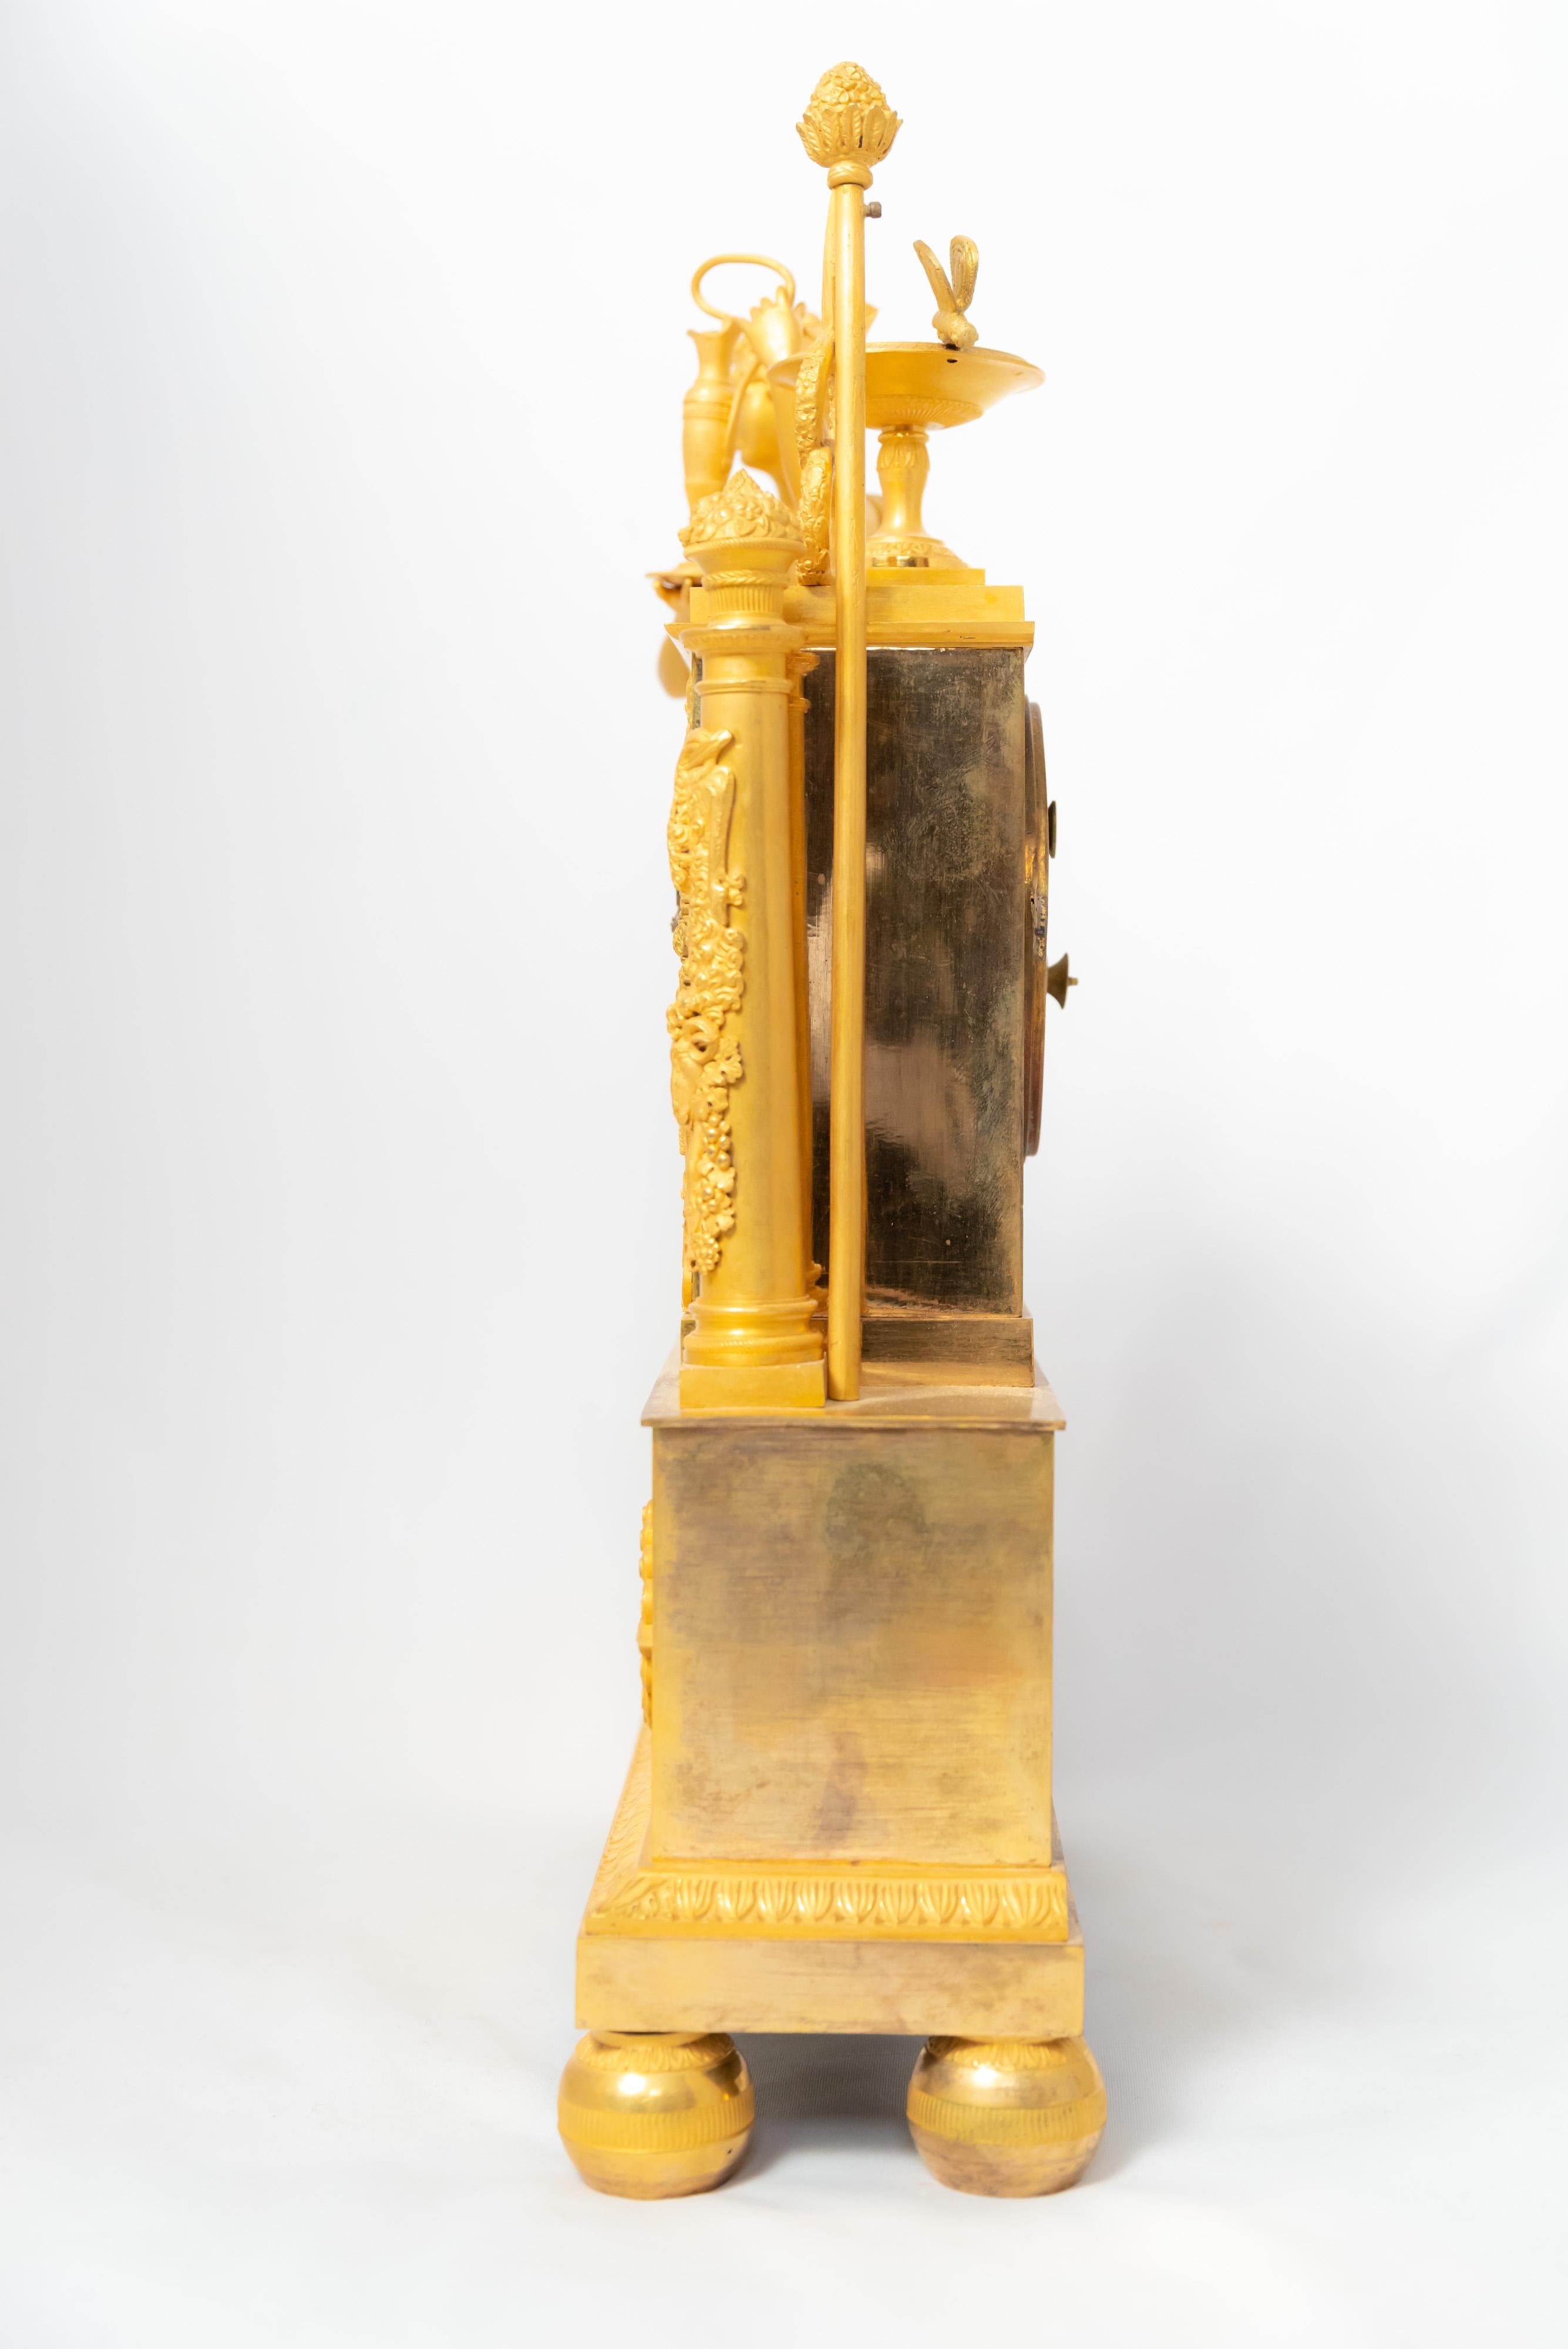 A mantel clock from the French “Restauration” era of 1815-1830 in fire-gilt bronze. The dial is enamelled white and the hours are depicted with Roman numerals. The figure represents the the goddess Hera, wife of Zeus. The elegant piece foregrounds